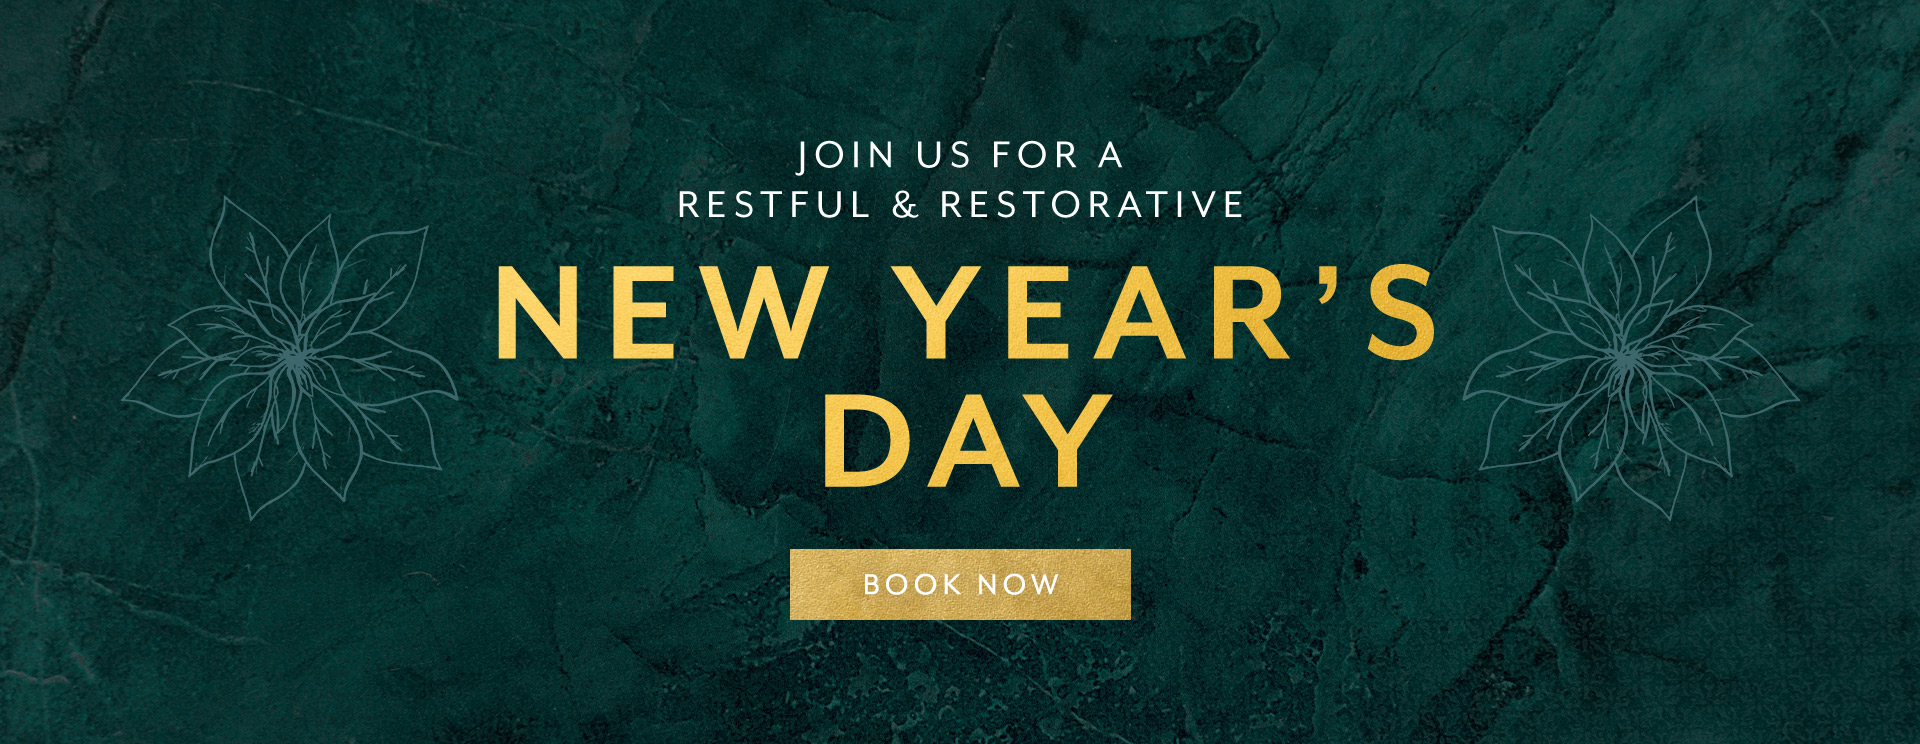 New Year's Day at The Tudor Rose